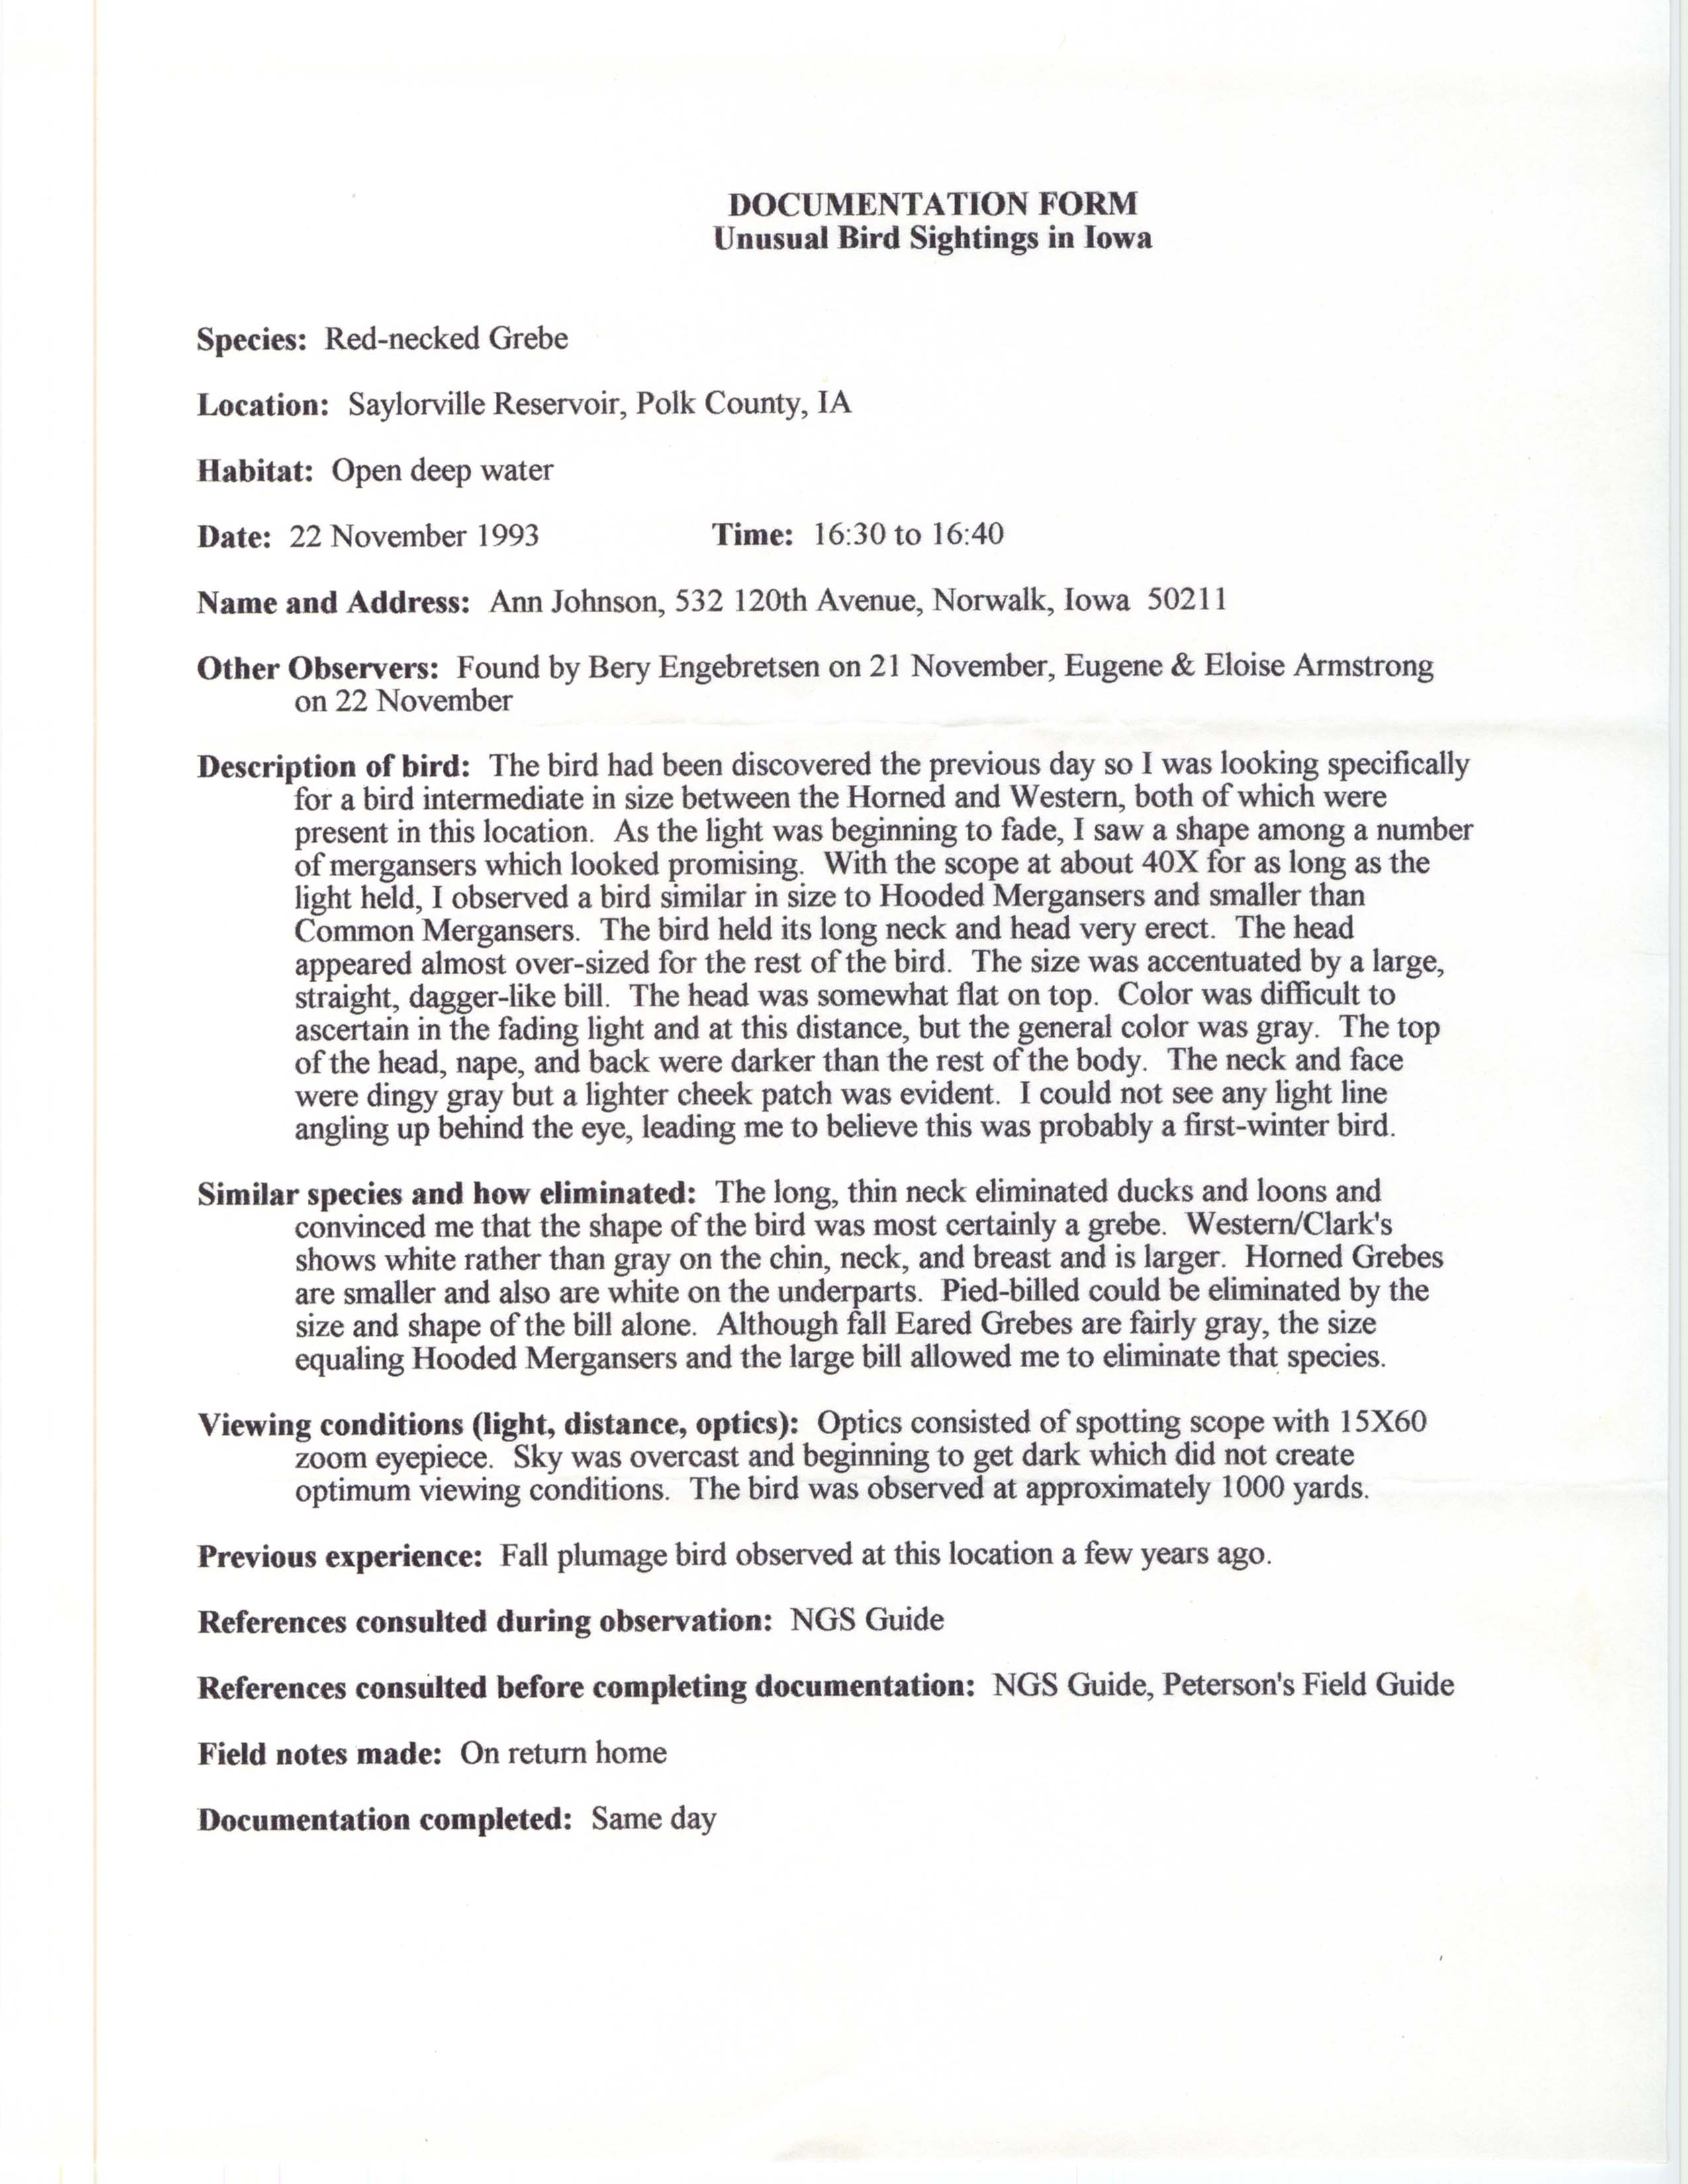 Rare bird documentation form for Red-necked Grebe at Saylorville Reservoir, 1993